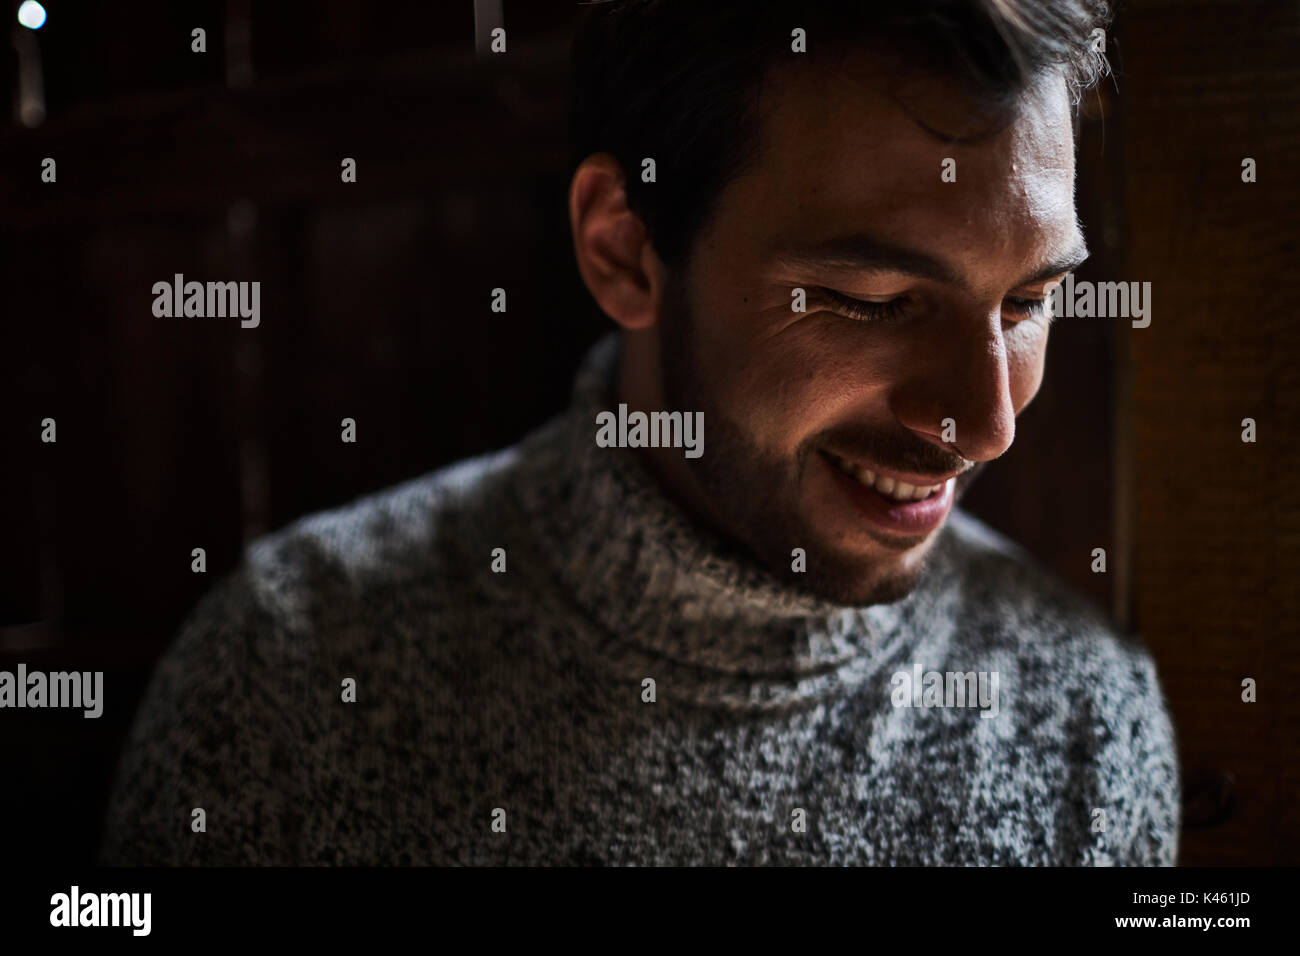 Barn, man with knitted pullover, smile, lowered view, portrait, Stock Photo